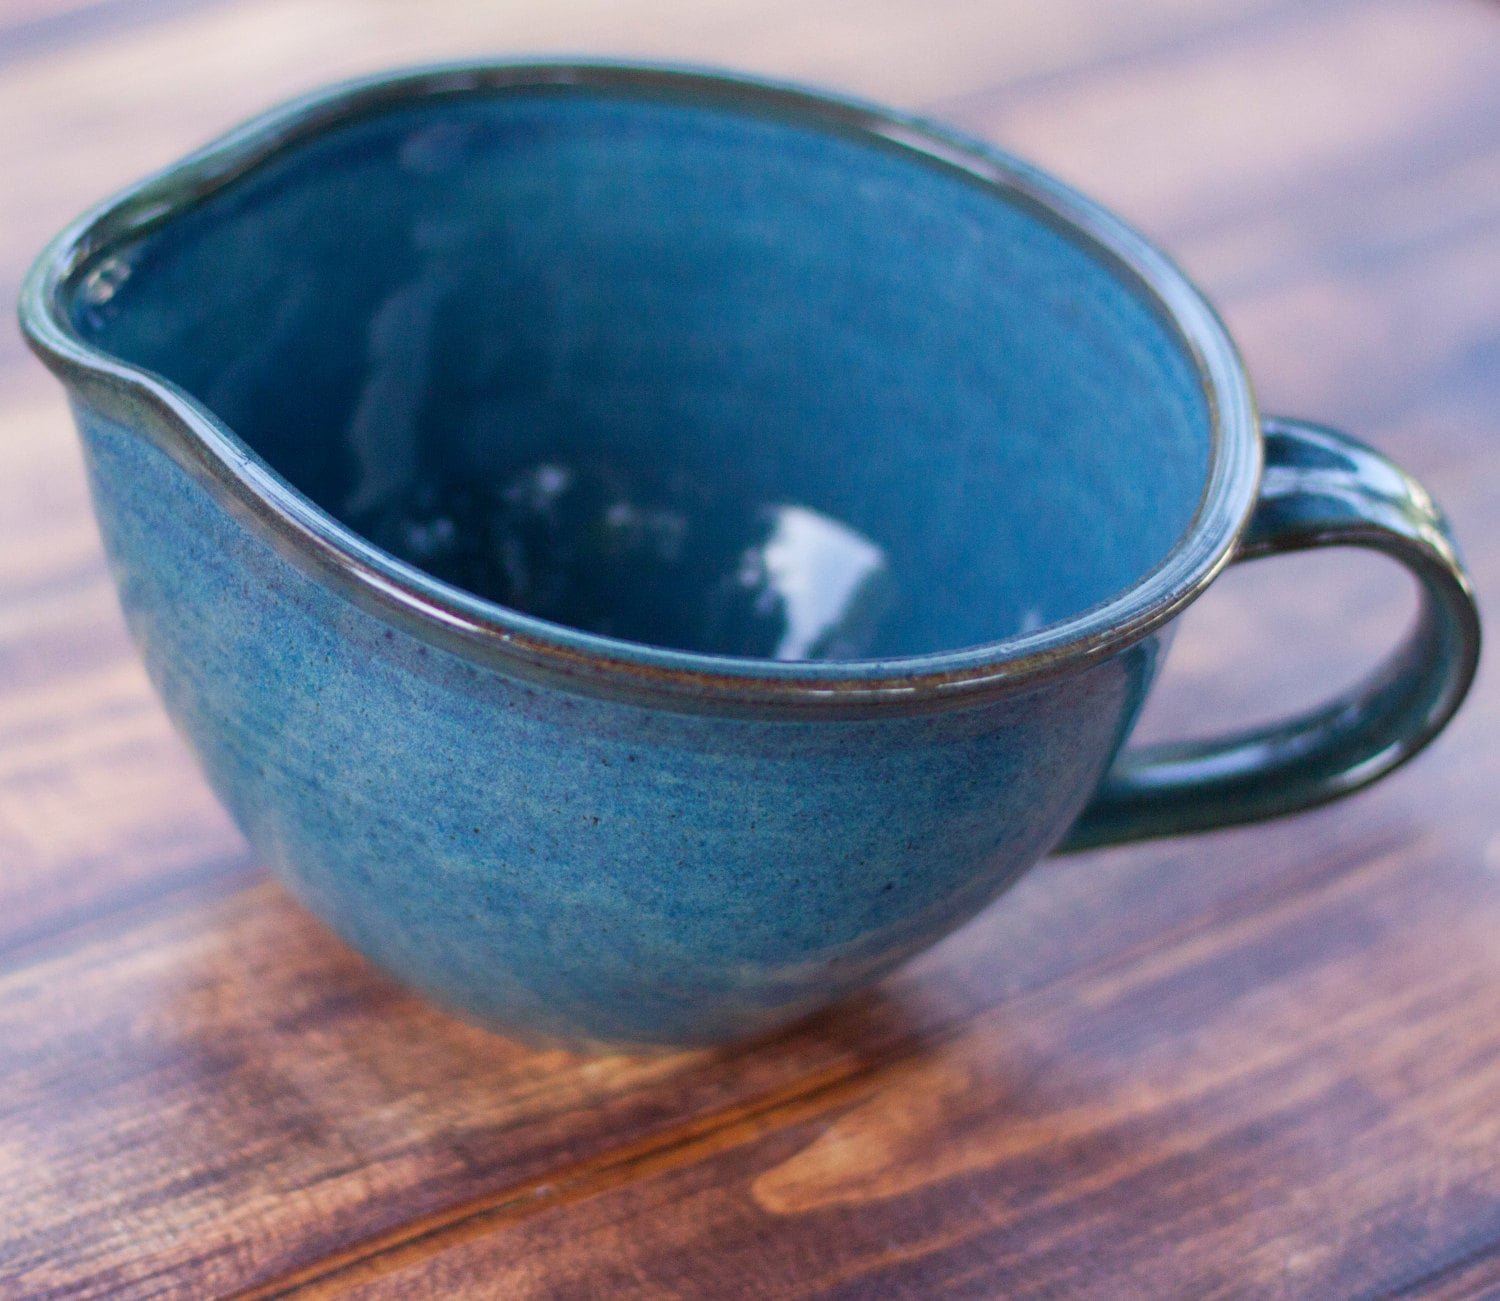 Kitchen Mixing Bowl, Egg Pouring Bowl, Handmade Batter Bowl, Ceramic Mixing  Bowl, Stoneware Bowl With Spout & Handle in Teal Green. 